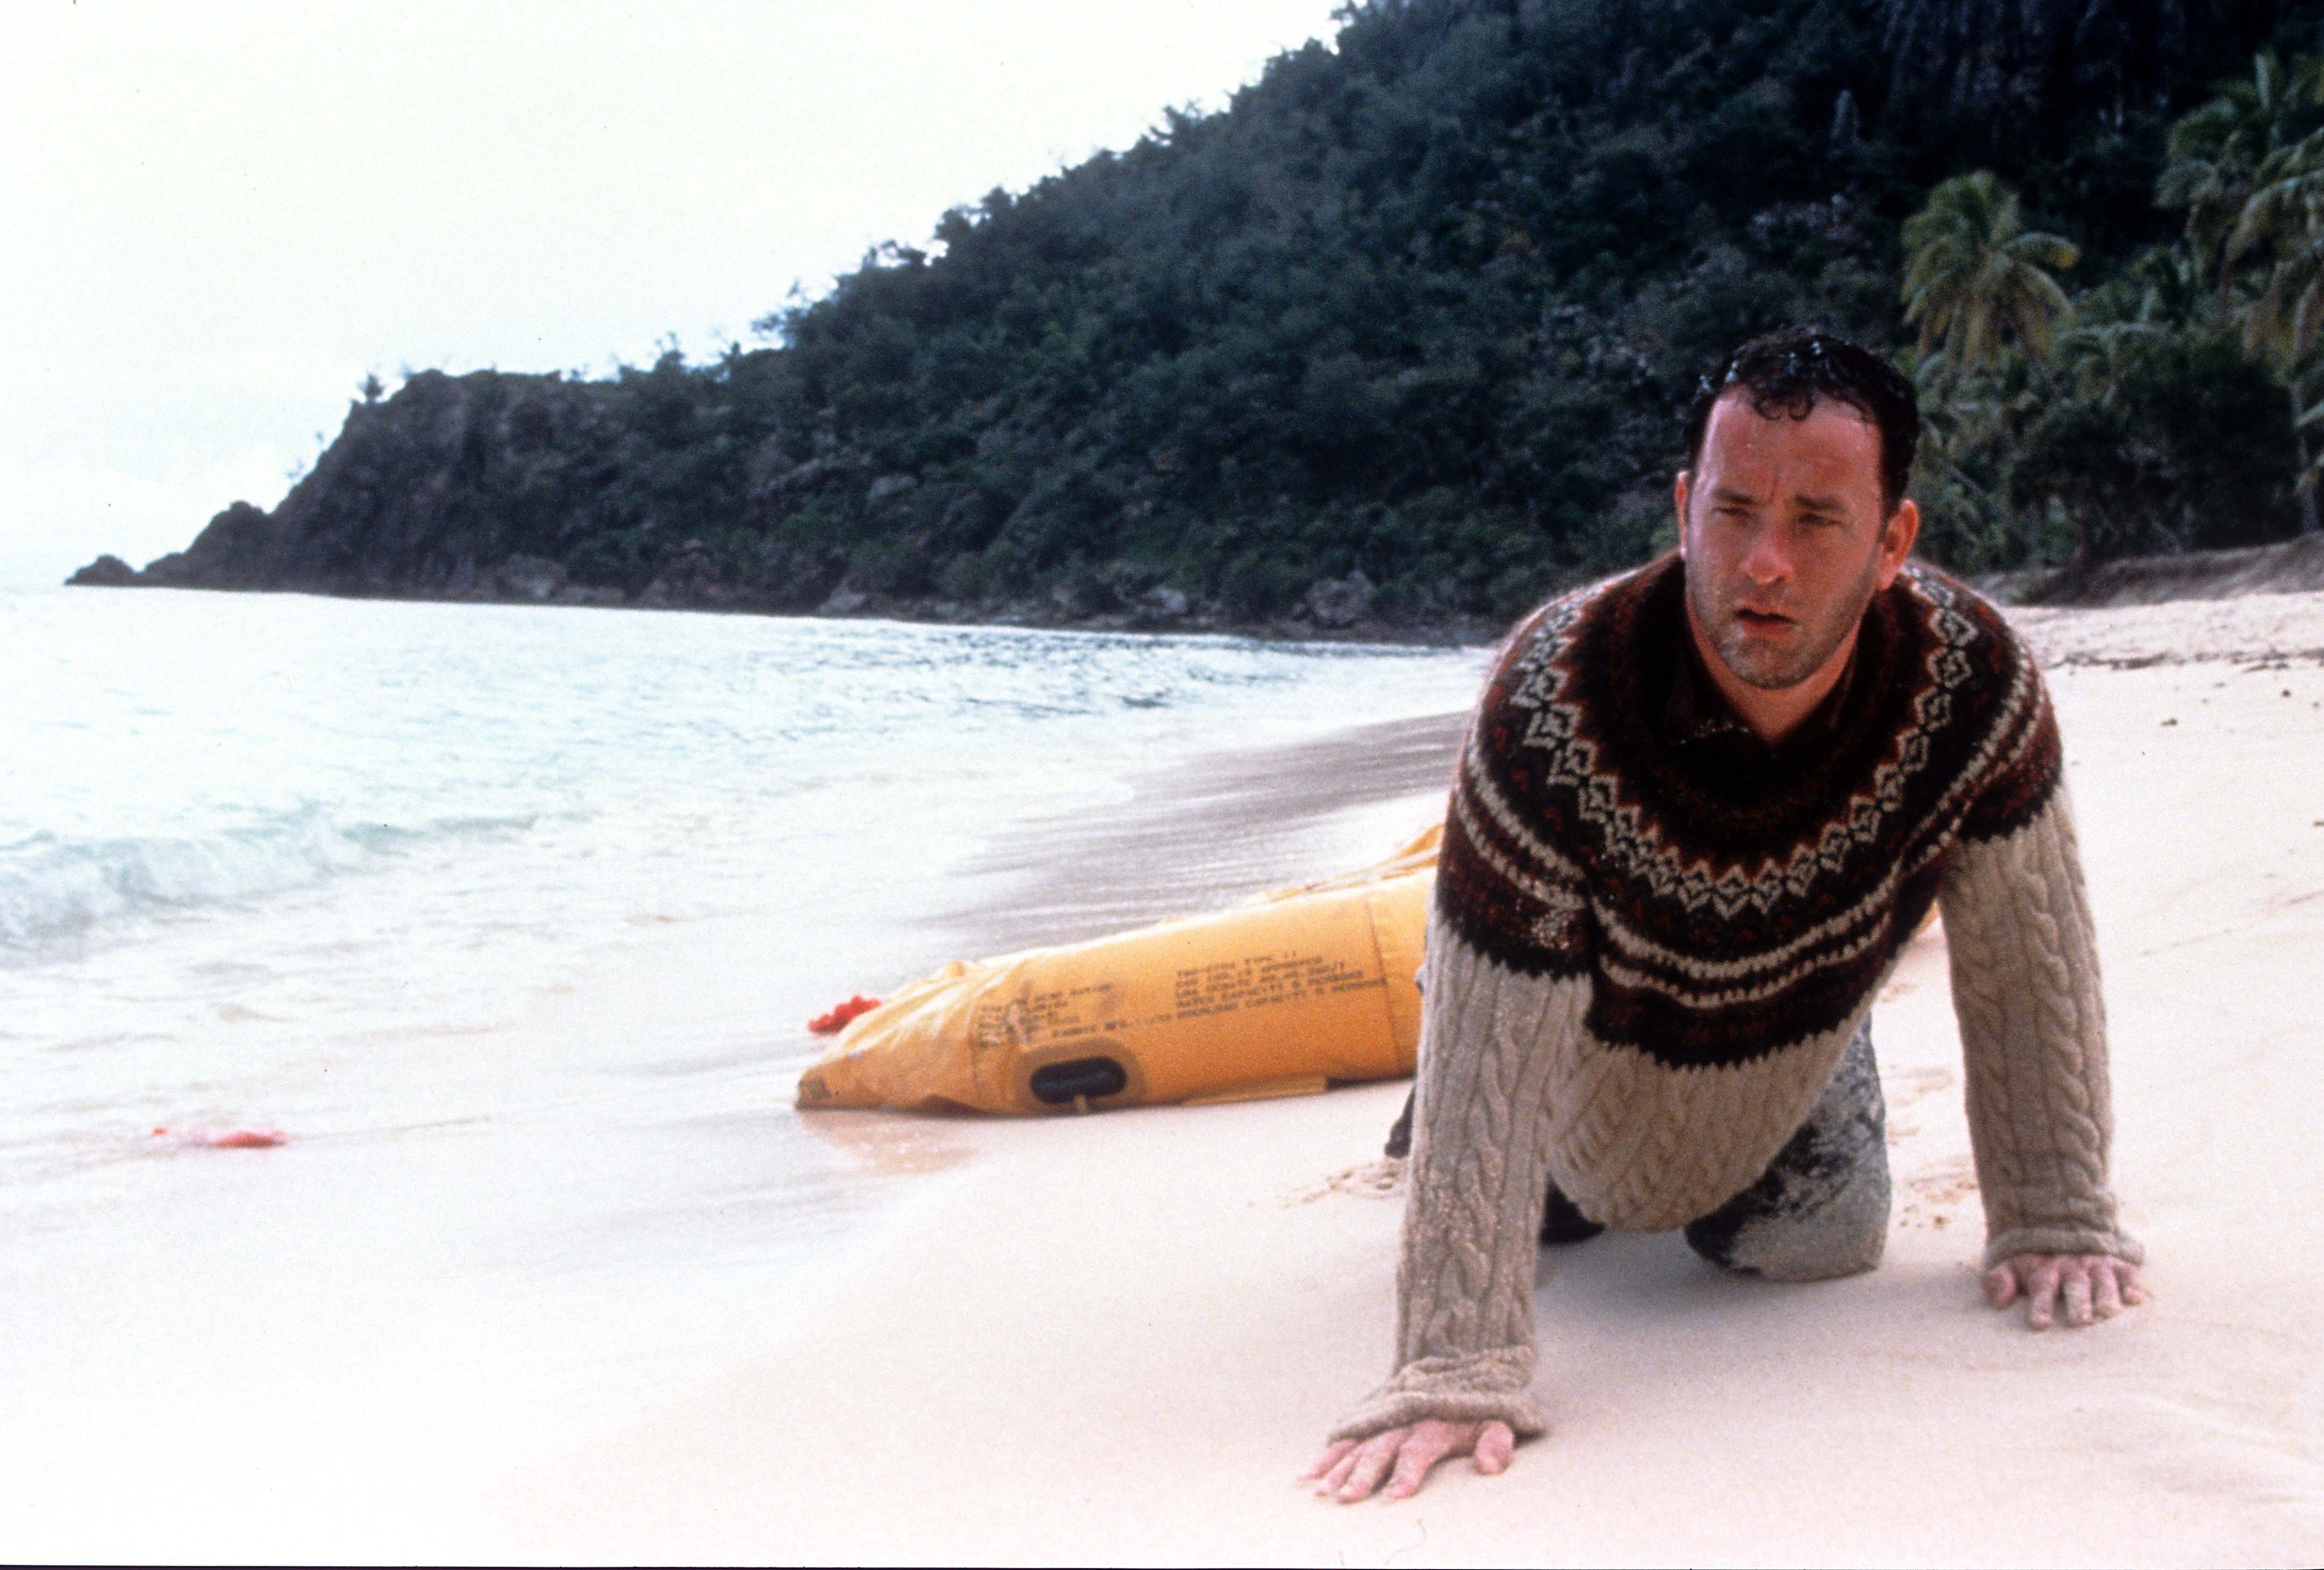 Tom Hanks washes ashore on the beach in Cast Away before finding Wilson.